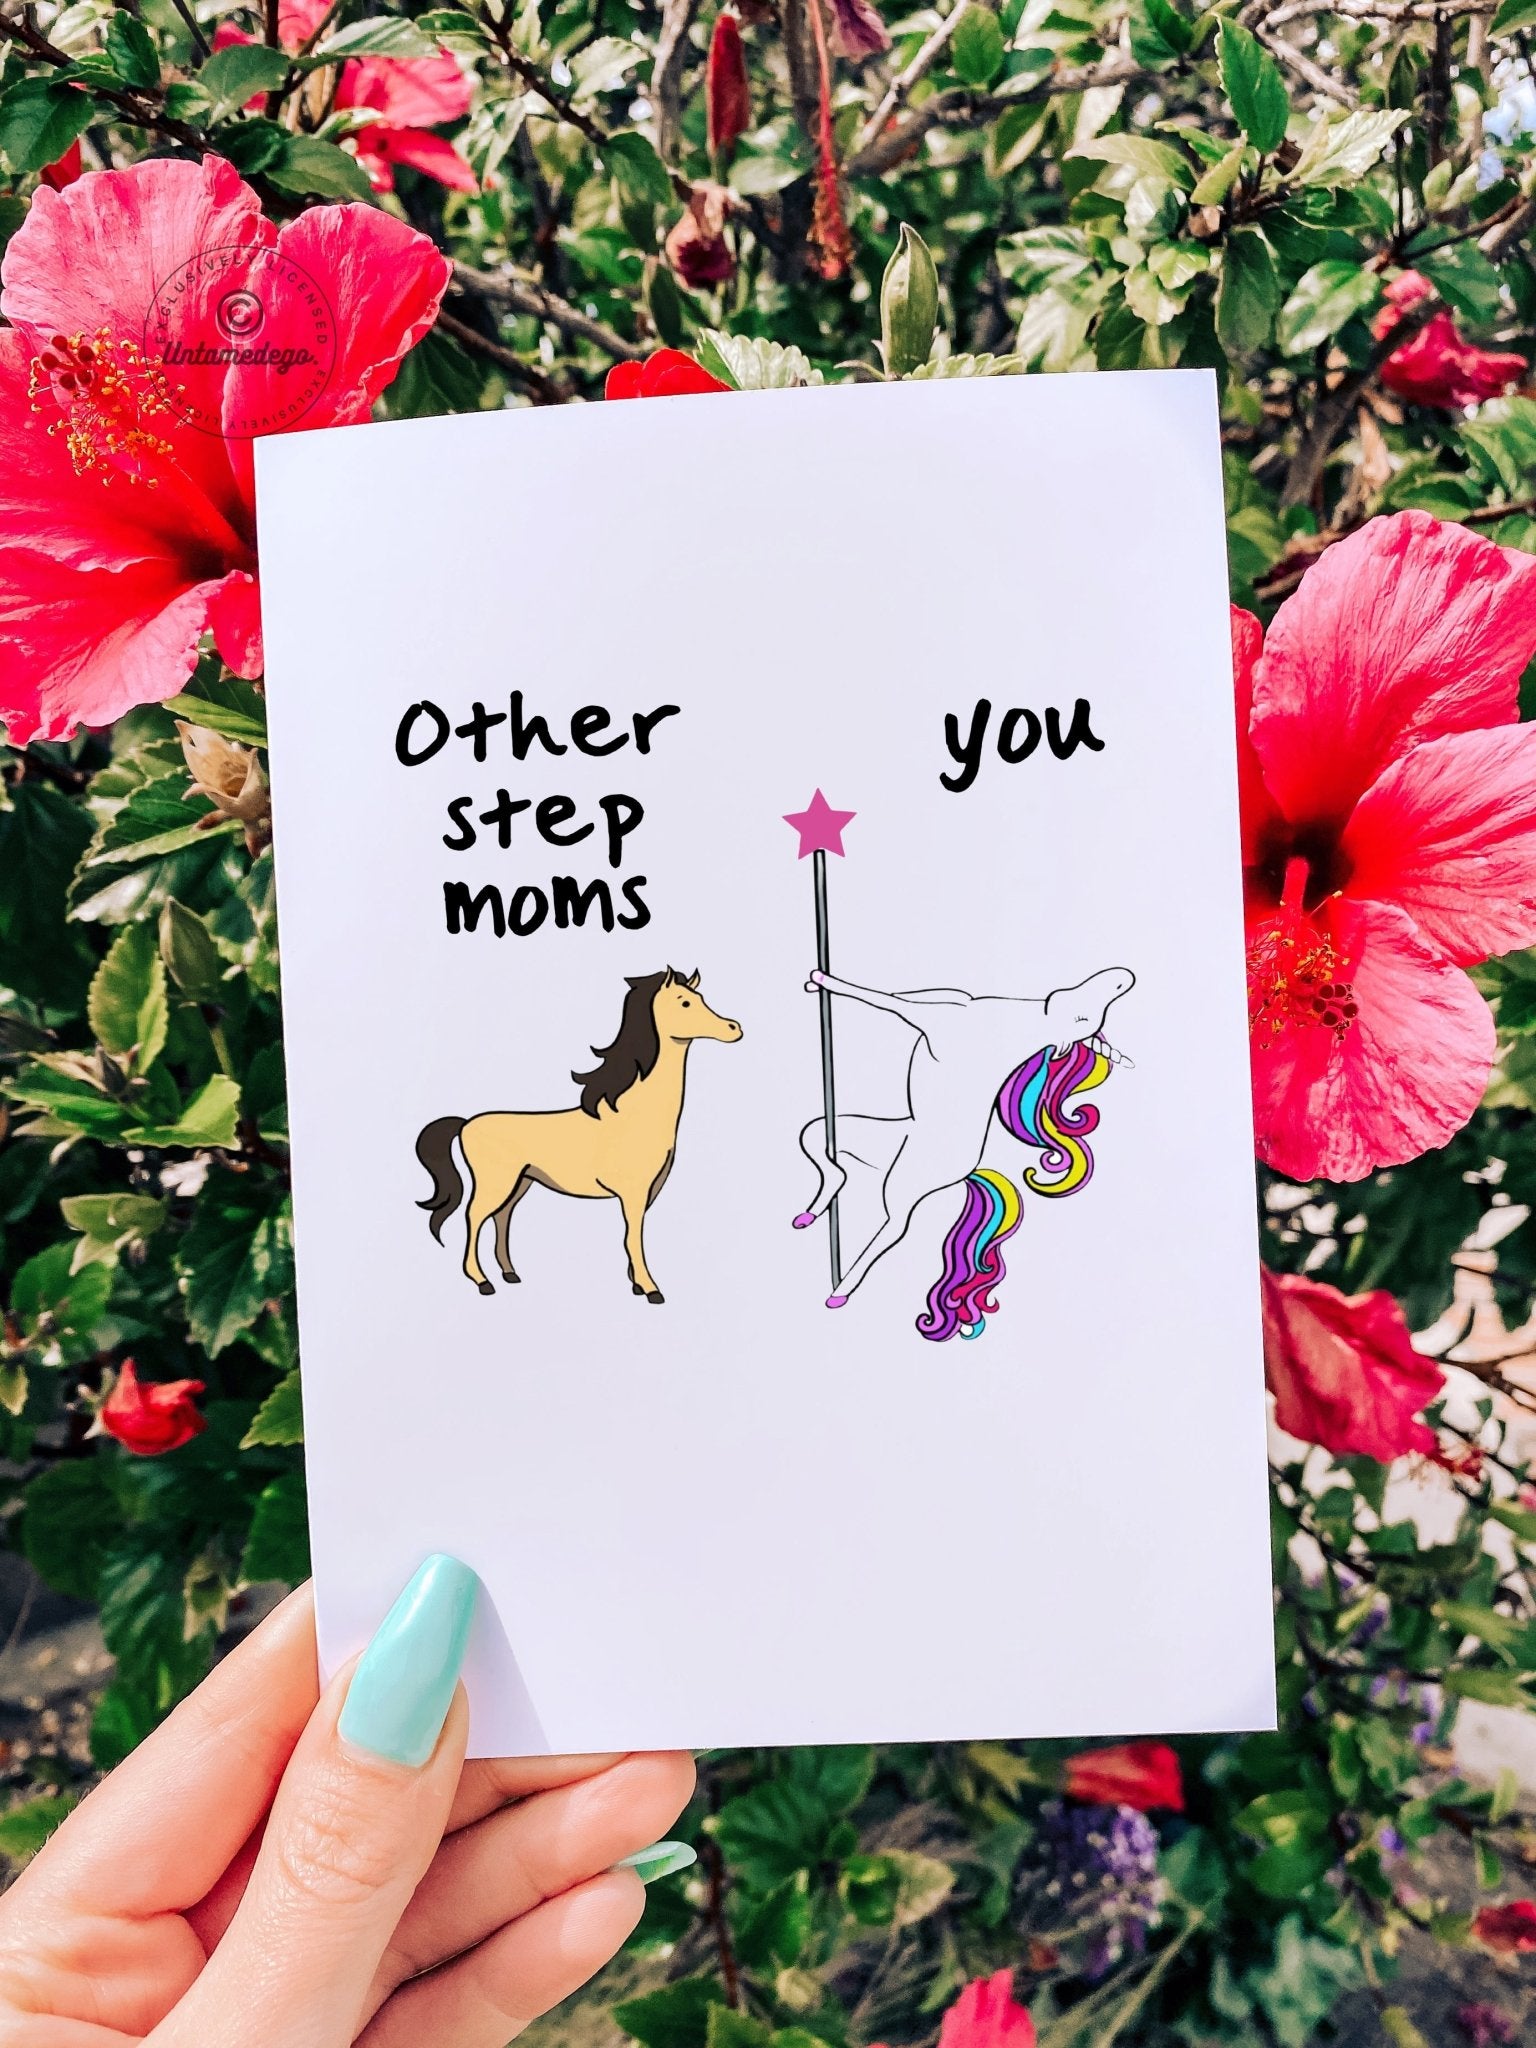 Funny Mother's Day Card -Other Stepmoms Vs You - UntamedEgo LLC.